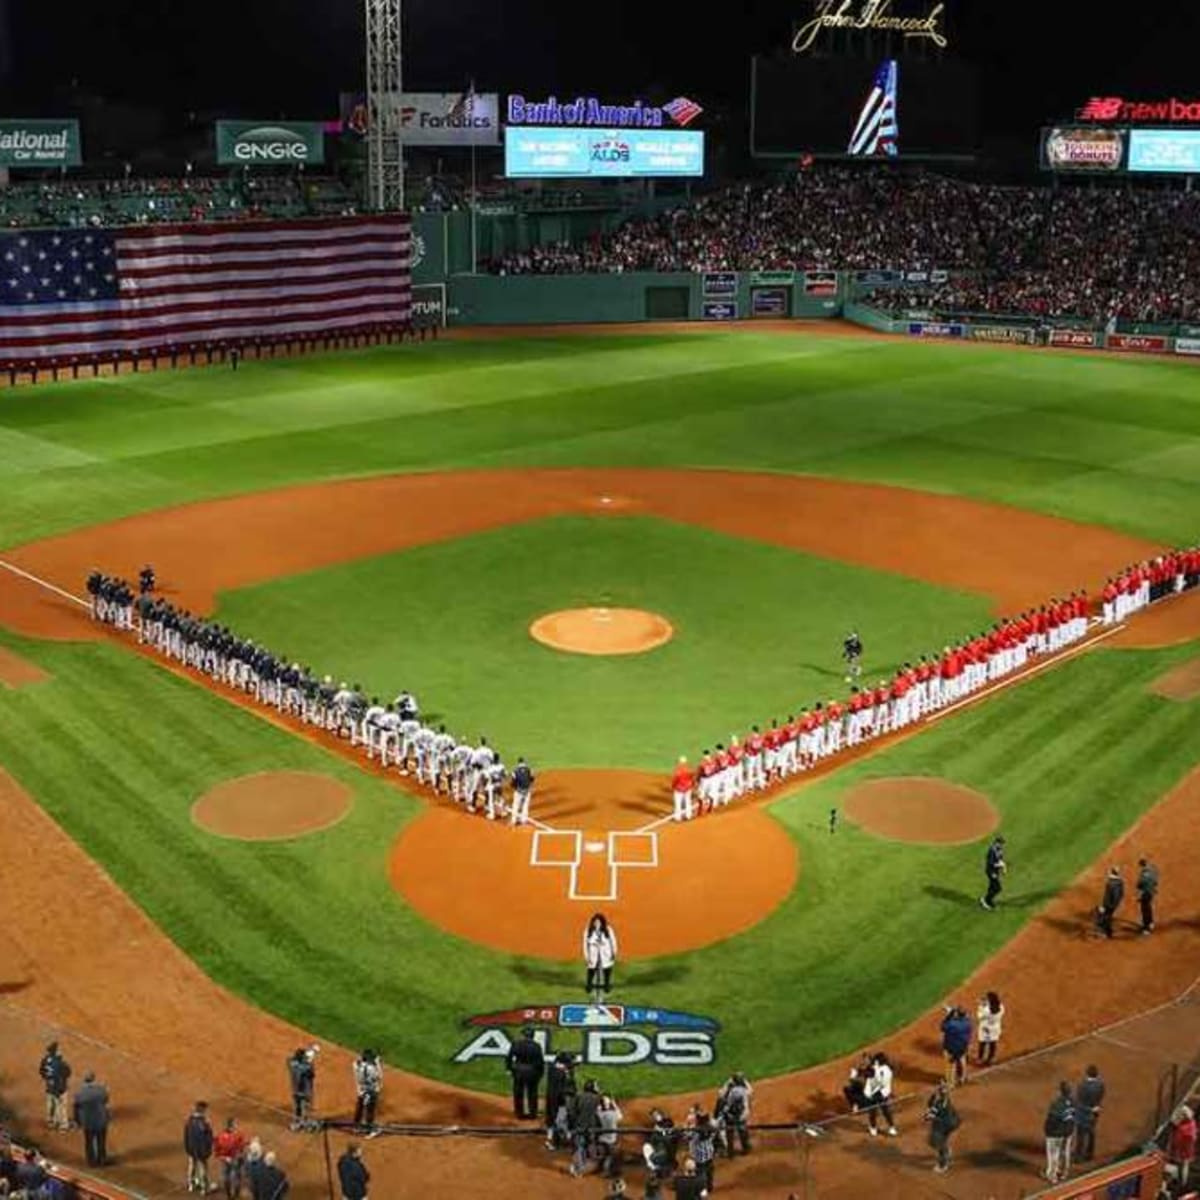 Boston Red Sox Vs Tampa Bay Devil Rays at Fenway Park. Boston Red Sox  News Photo - Getty Images